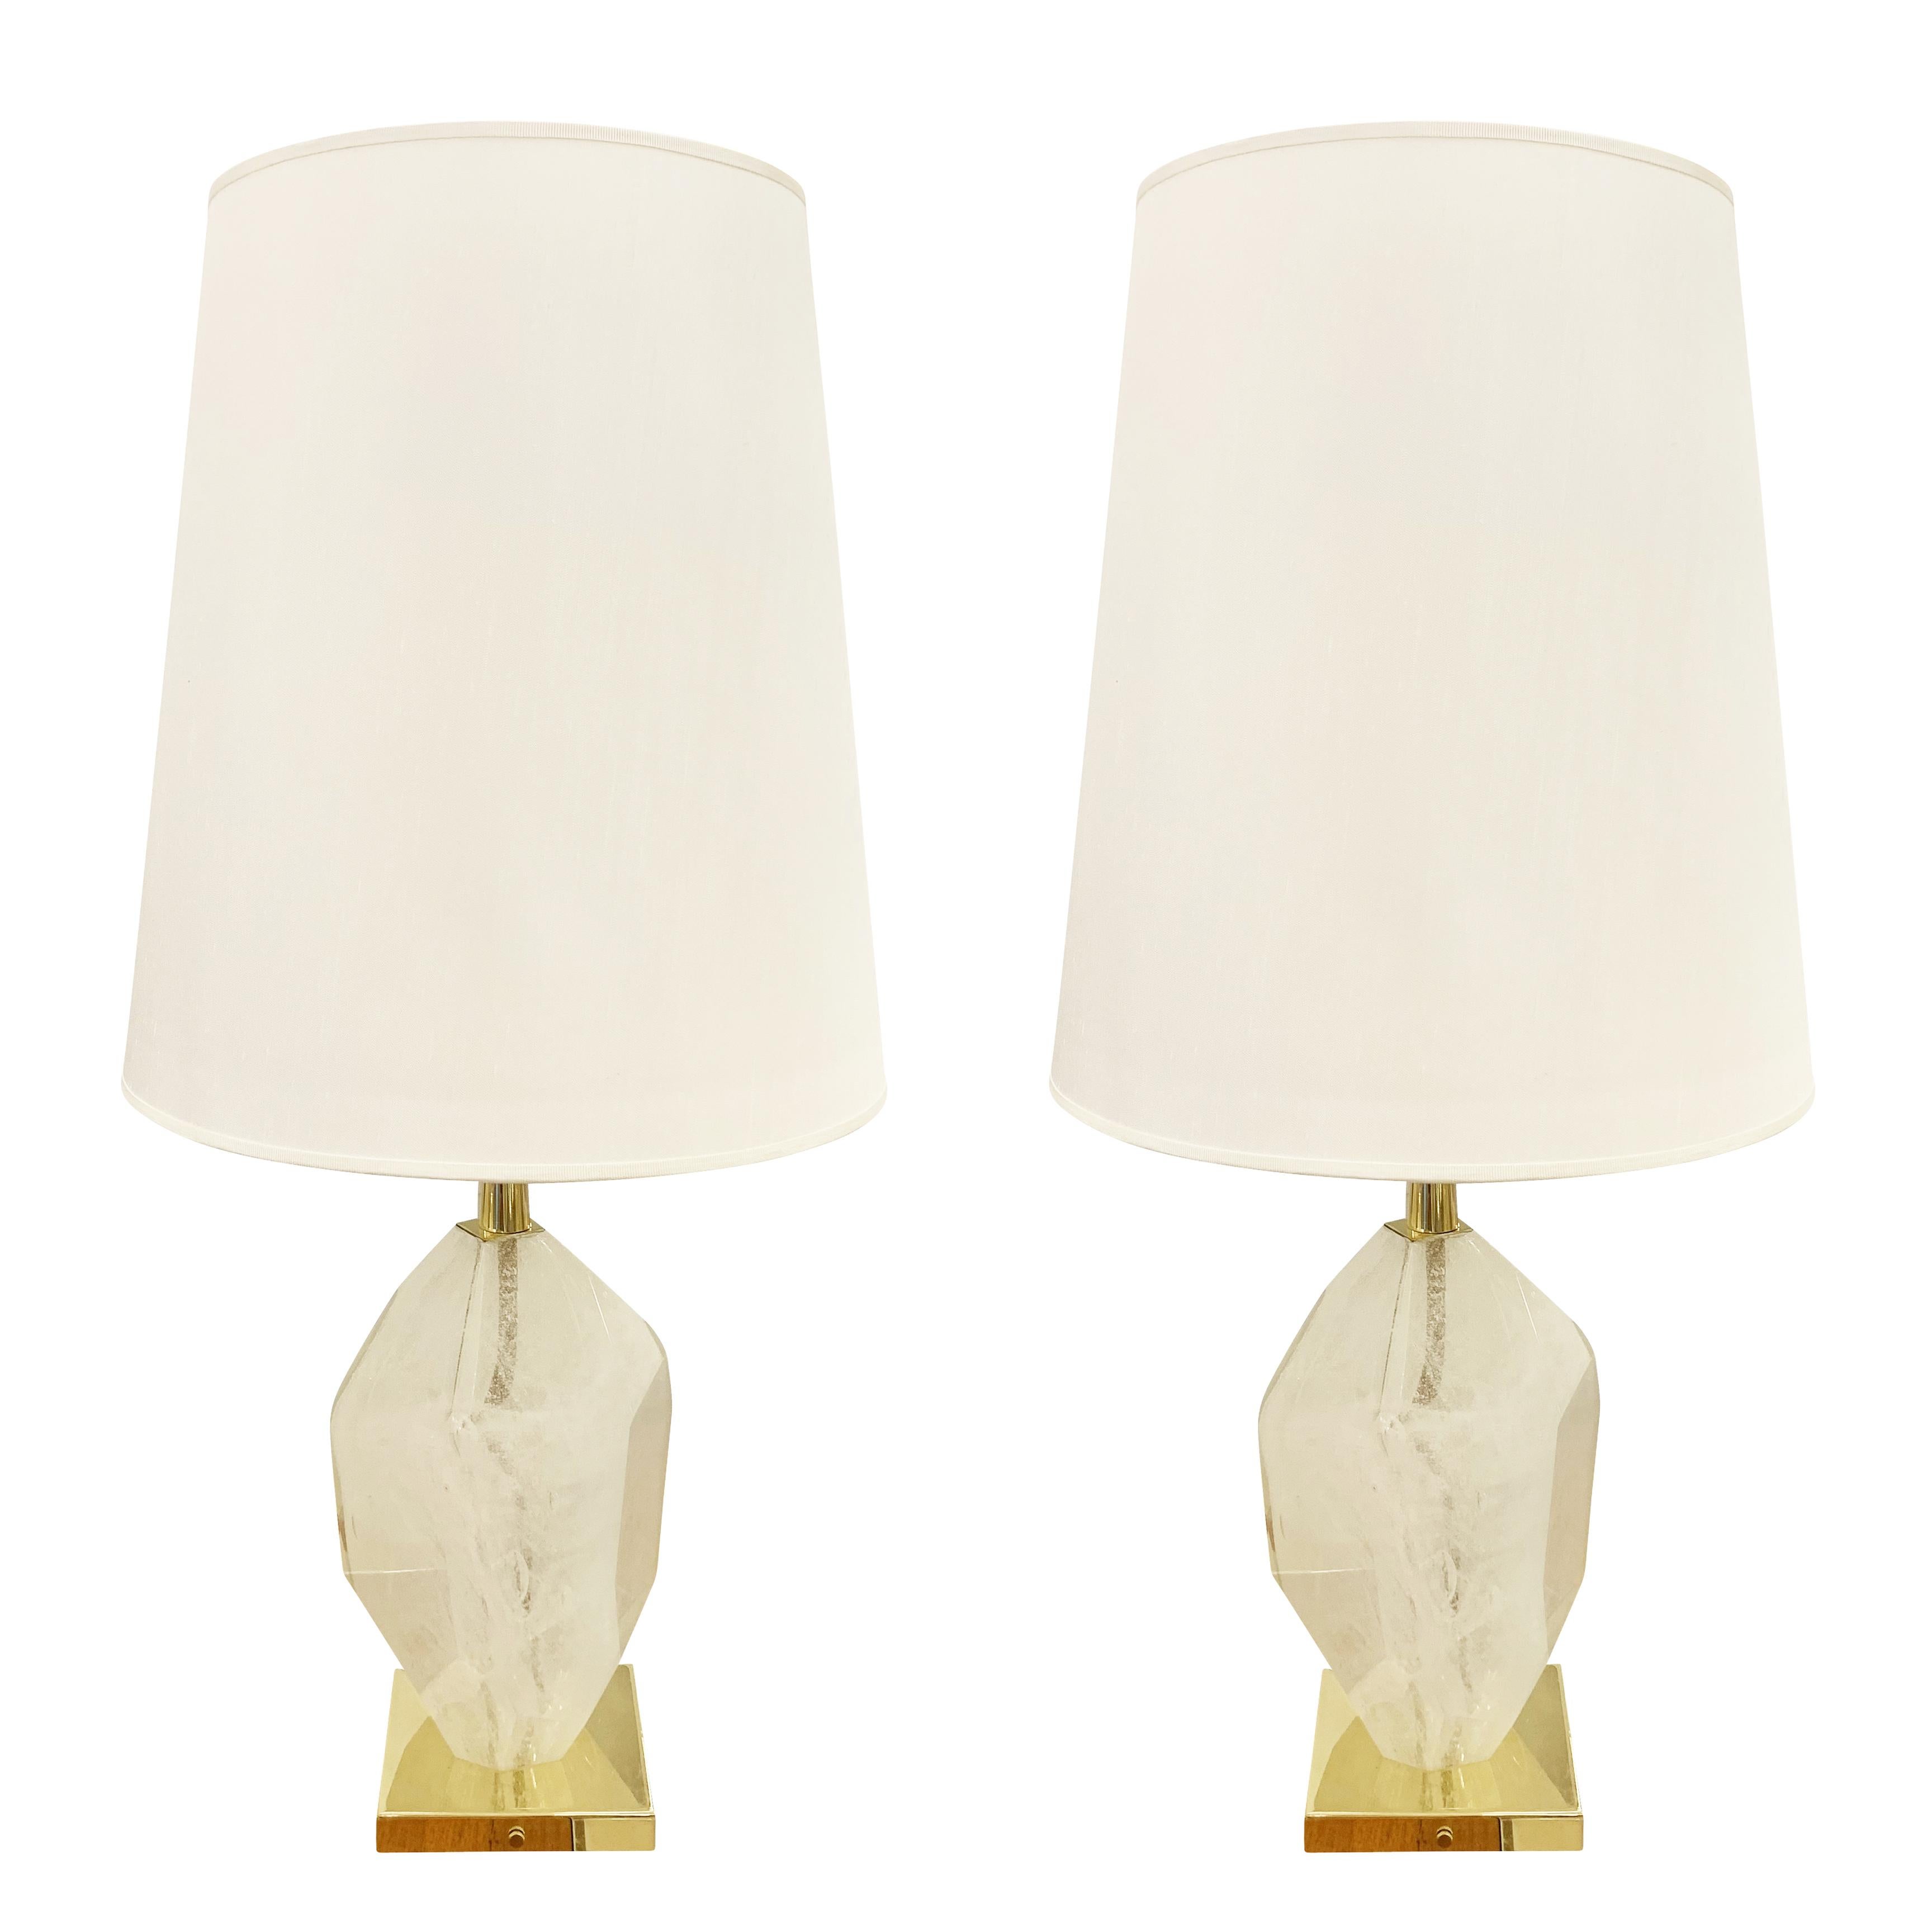 Contemporary table lamps featuring a beautiful glass crystal handblown in  Murano. Brass hardware. Price per lamp-two available.

Condition: Minor wear consistent with age and use. Shade not included.

Diameter: 6.5”

Height: 18.5” (to top of harp